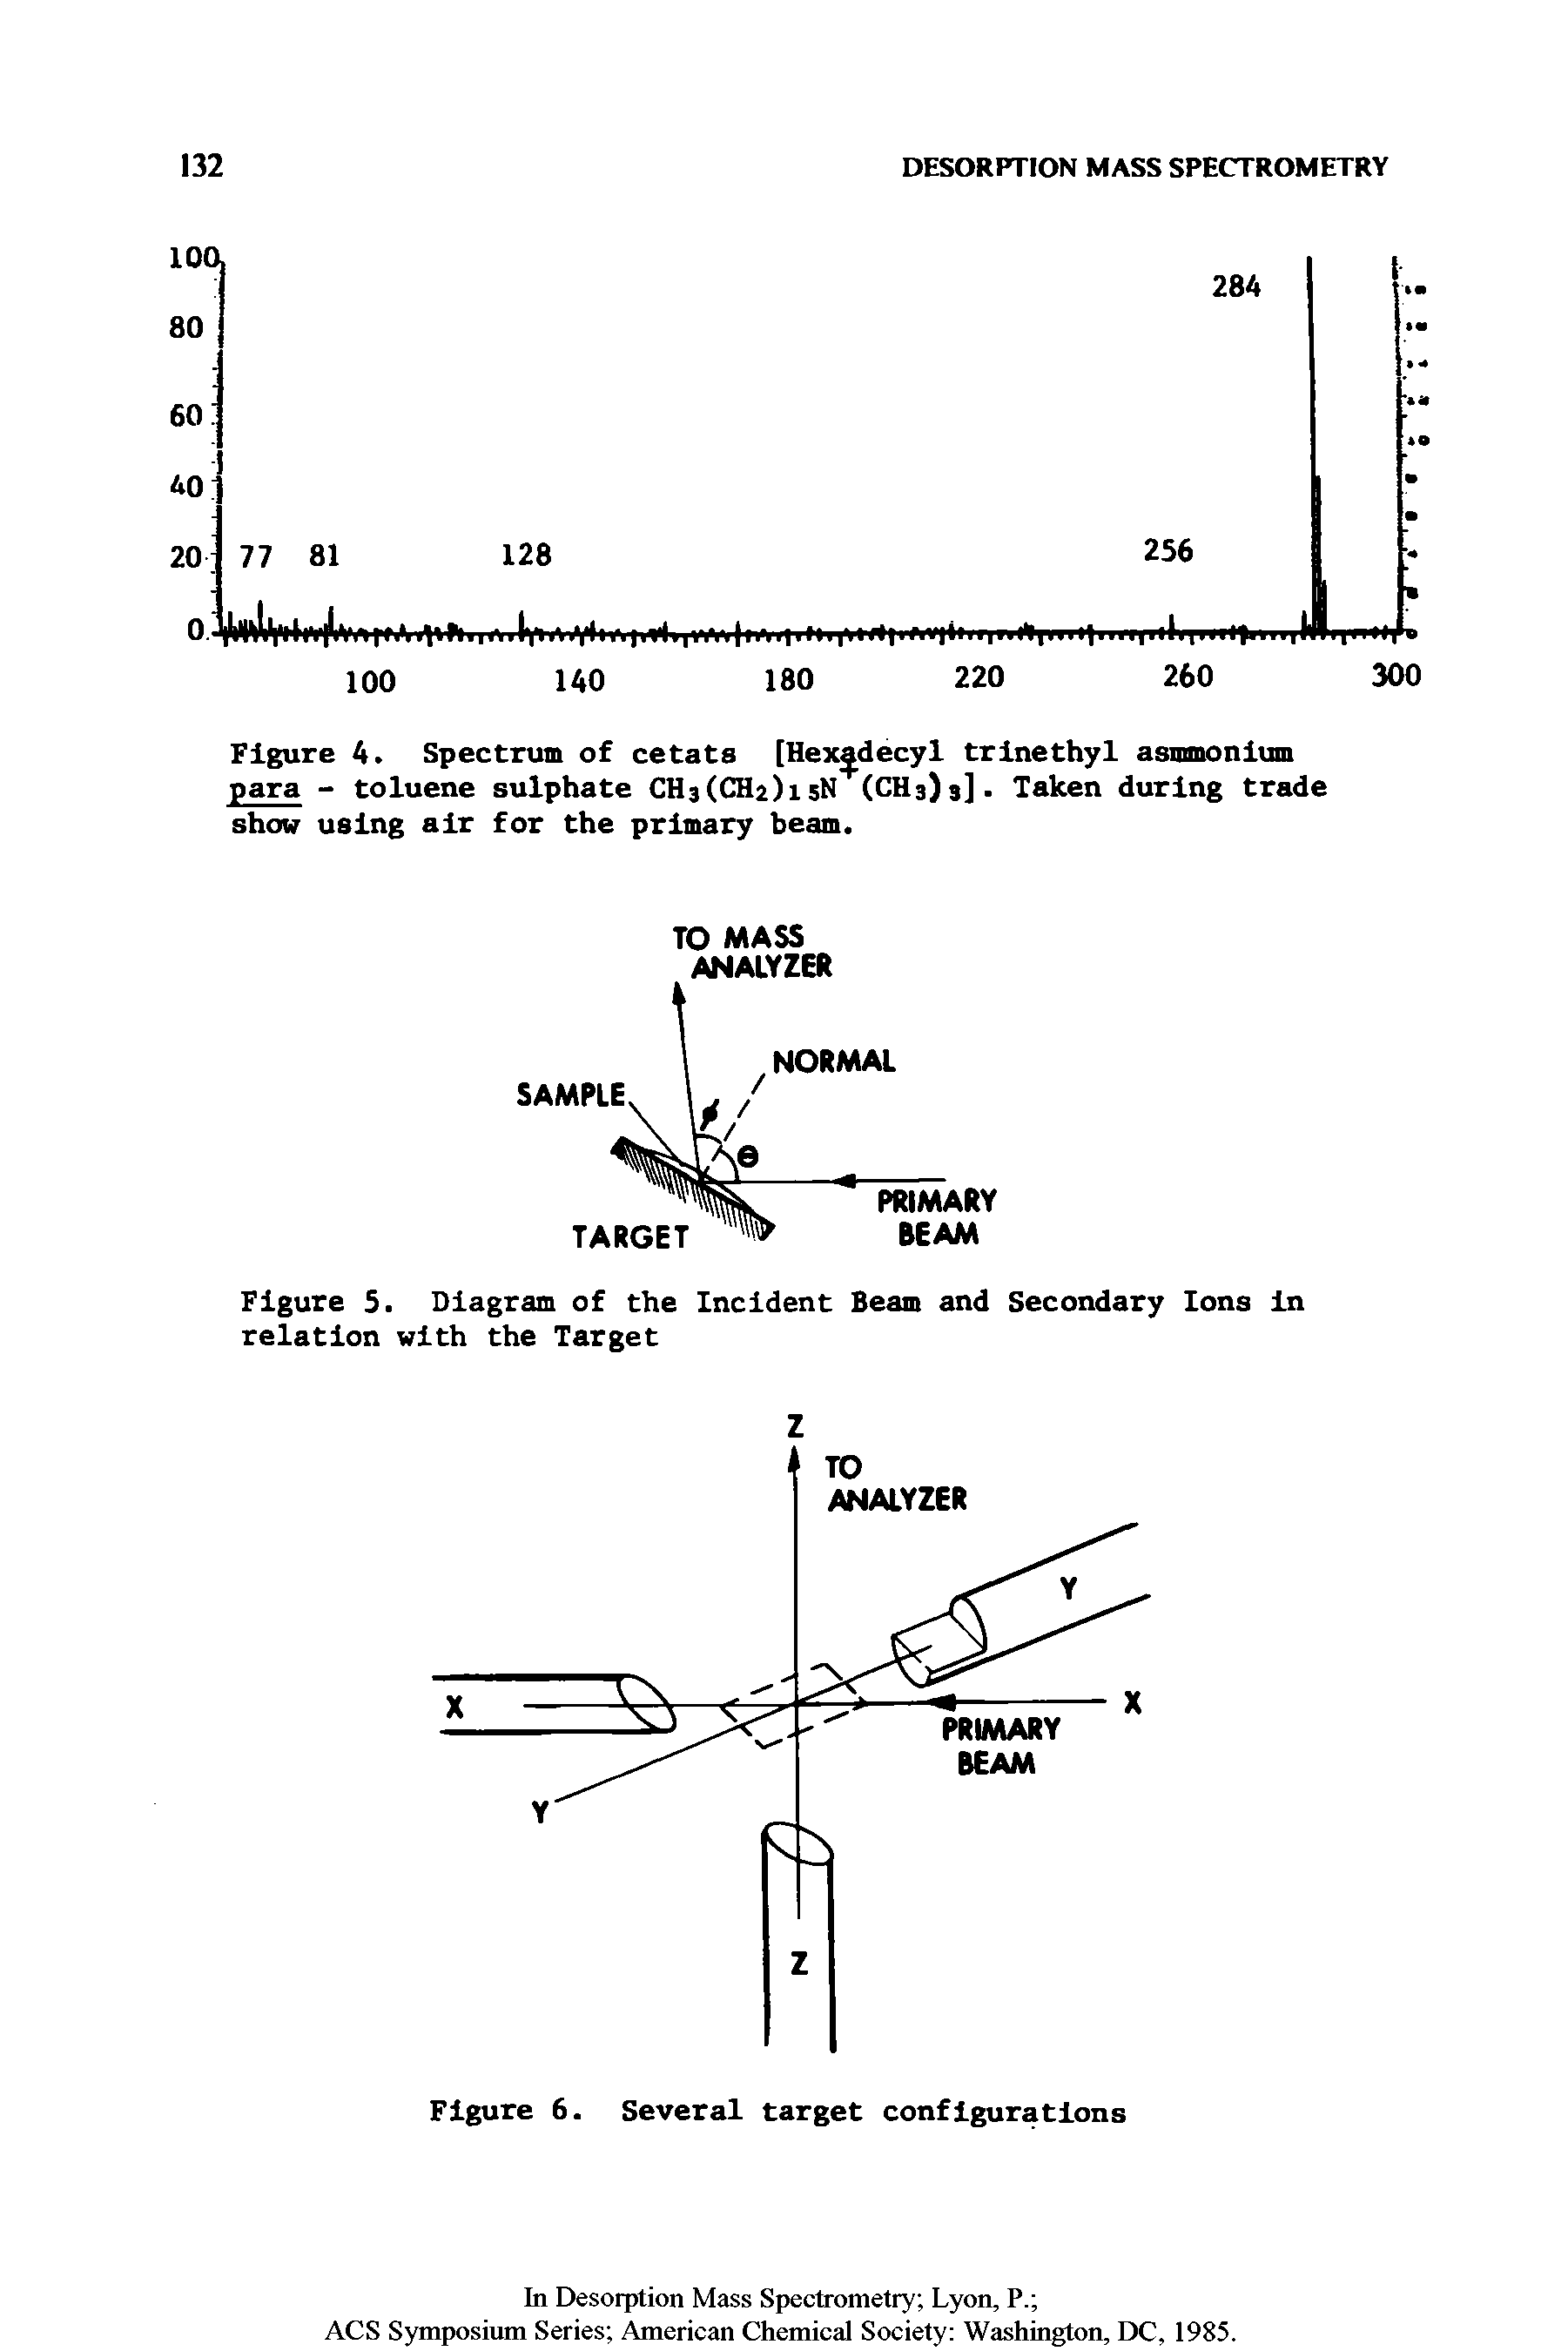 Figure 4. Spectrum of cetats [Hex decyl trinethyl asmmonium para - toluene sulphate CH3(CH2)15N (CH3)3]. Taken during trade show using air for the primary beam.